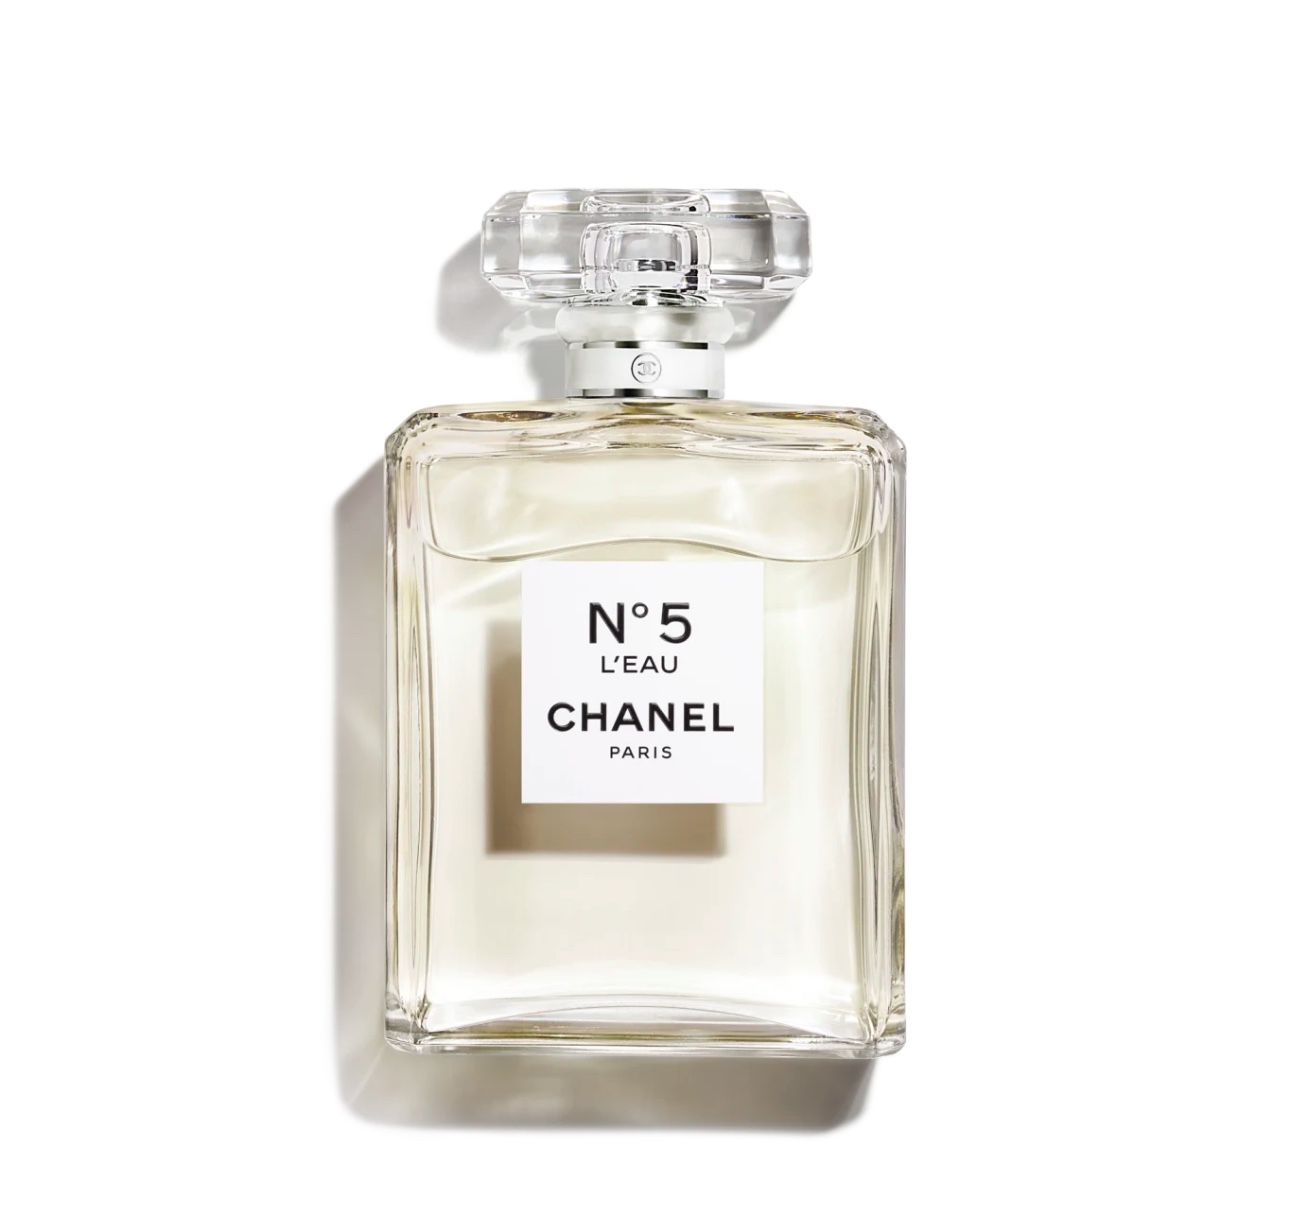 New Out If Box Chanel no 5 3.4oz